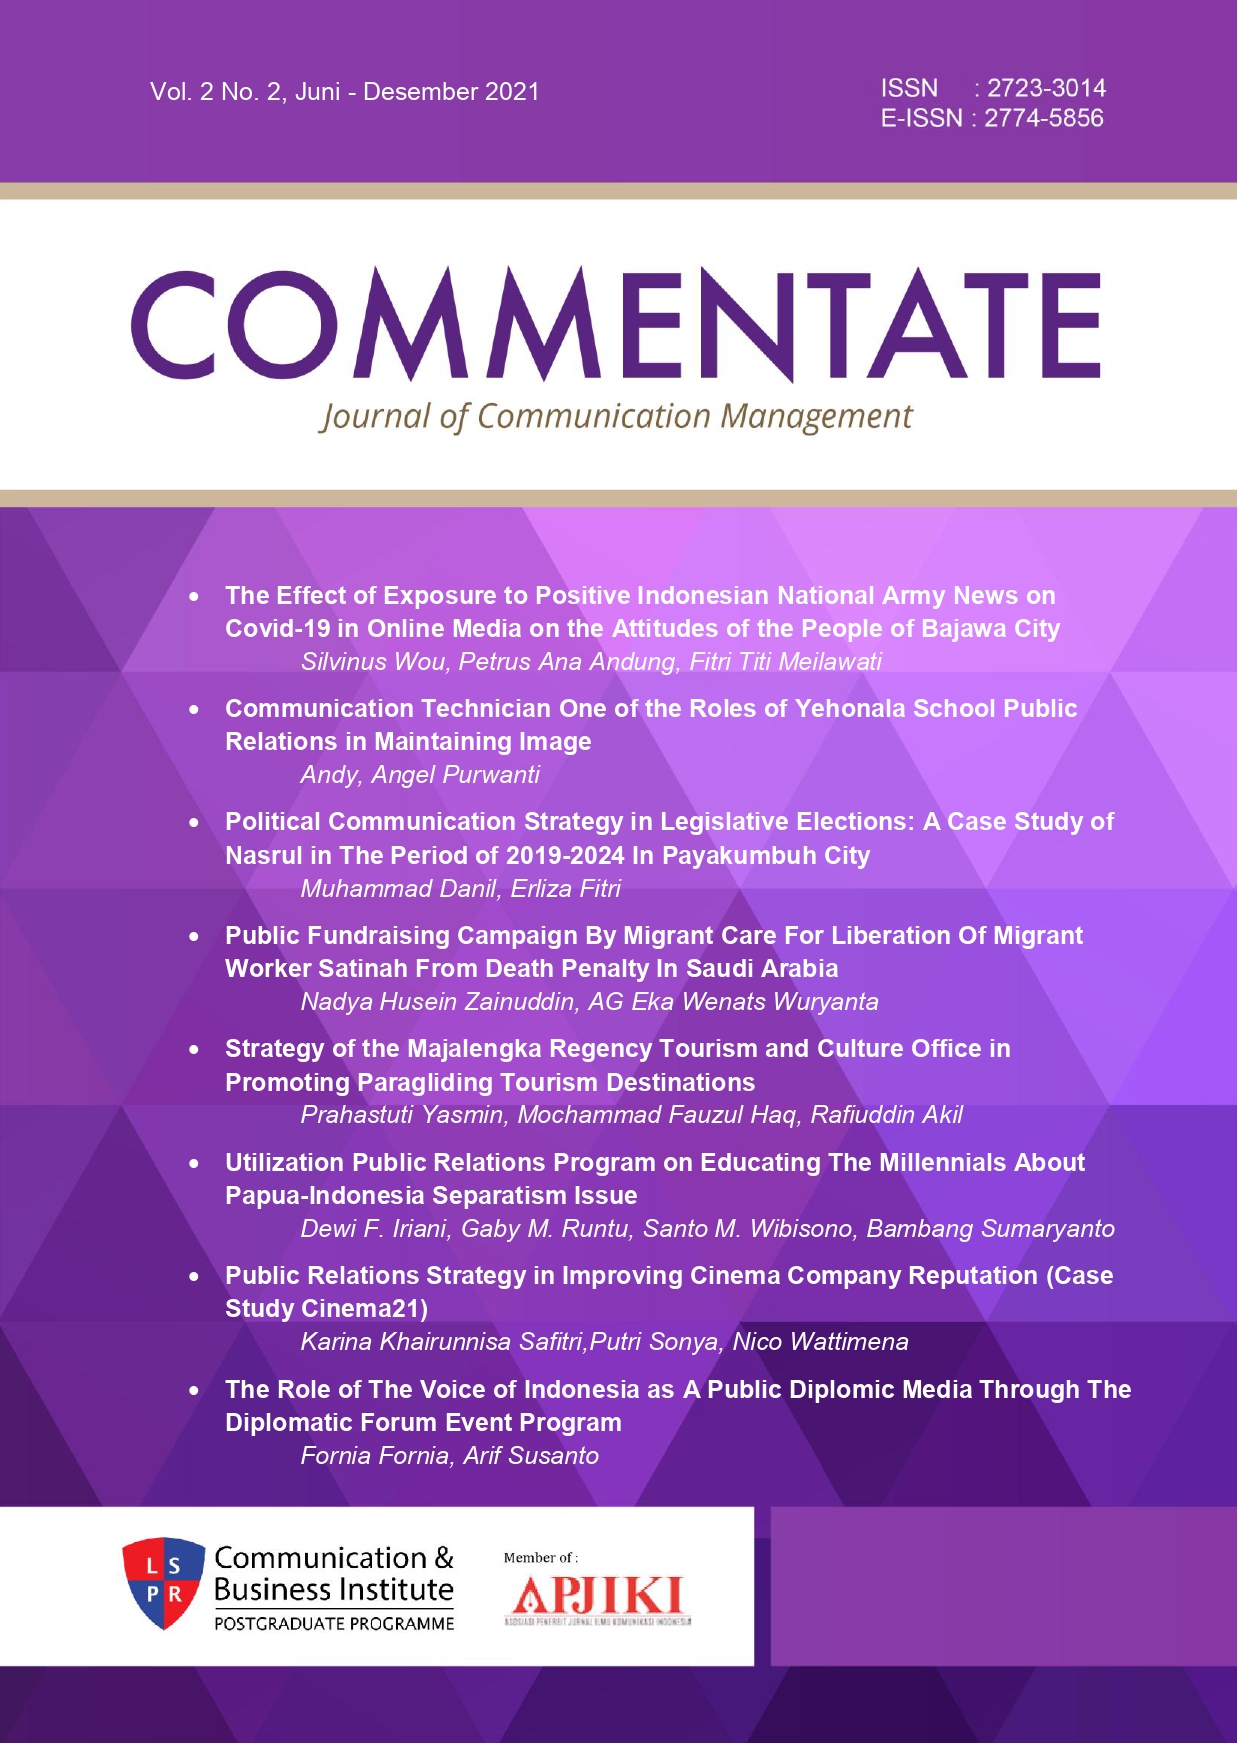 					View Vol. 2 No. 2 (2021): COMMENTATE: Journal of Communication Management
				